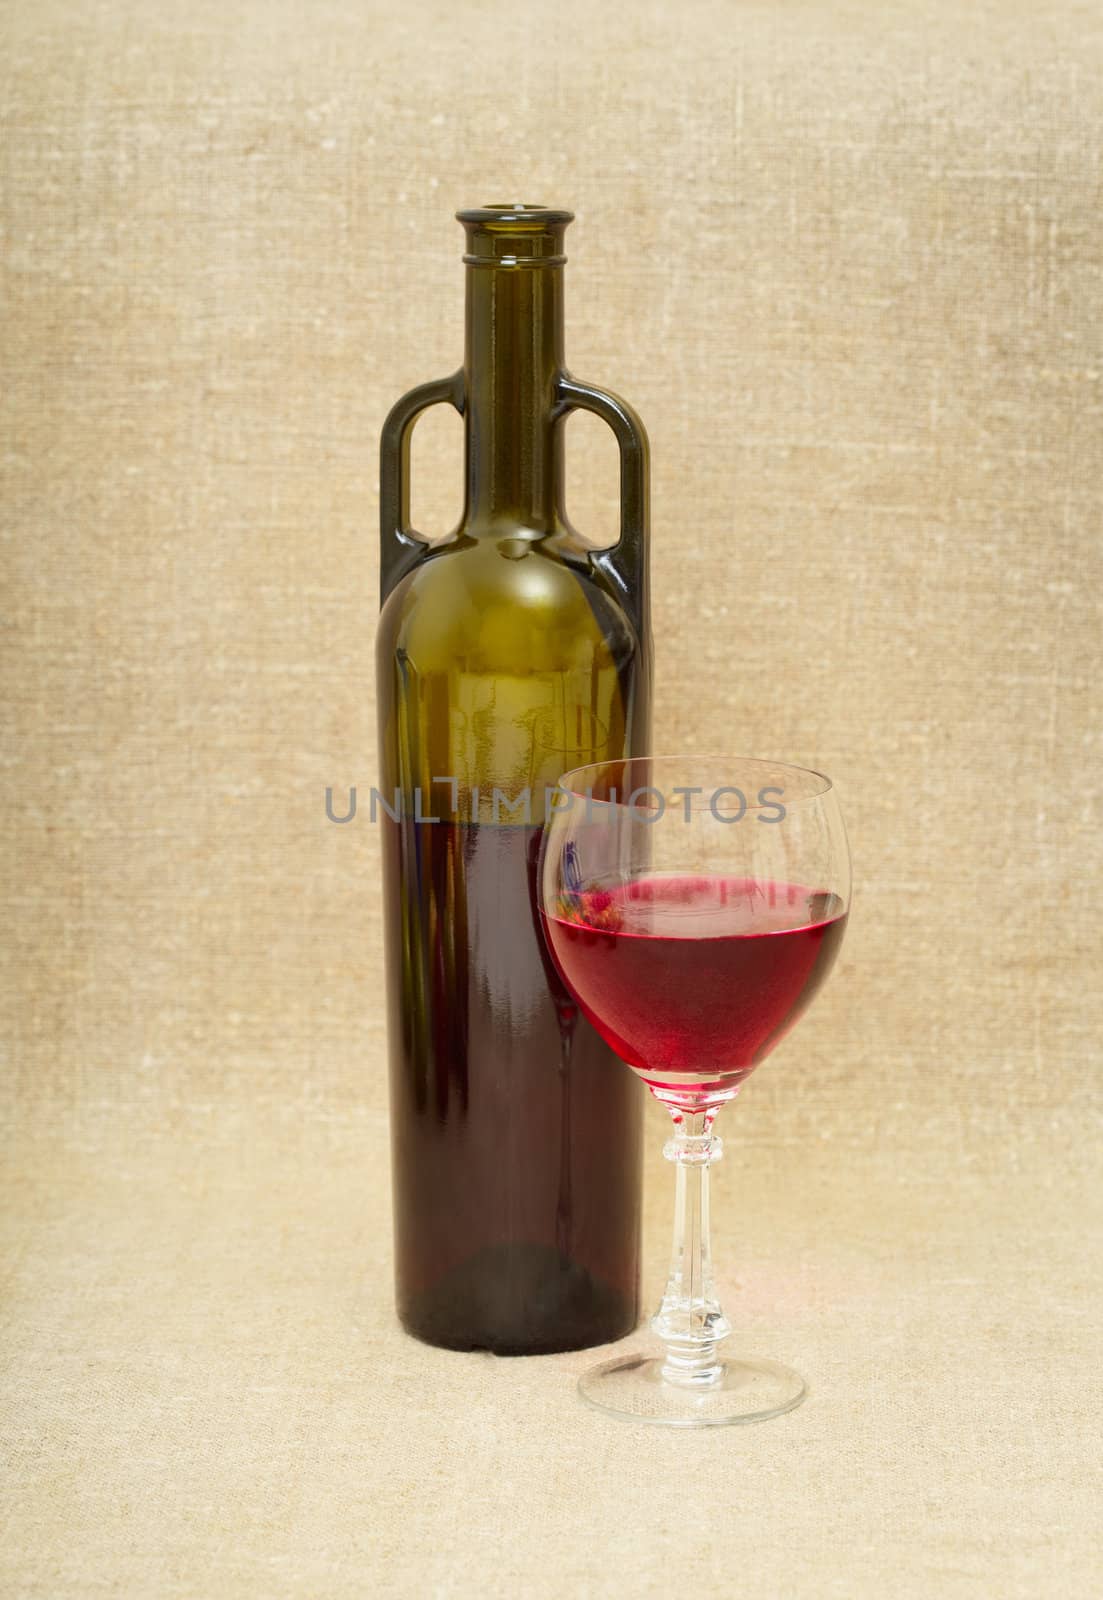 Bottle and glass with red wine against a canvas